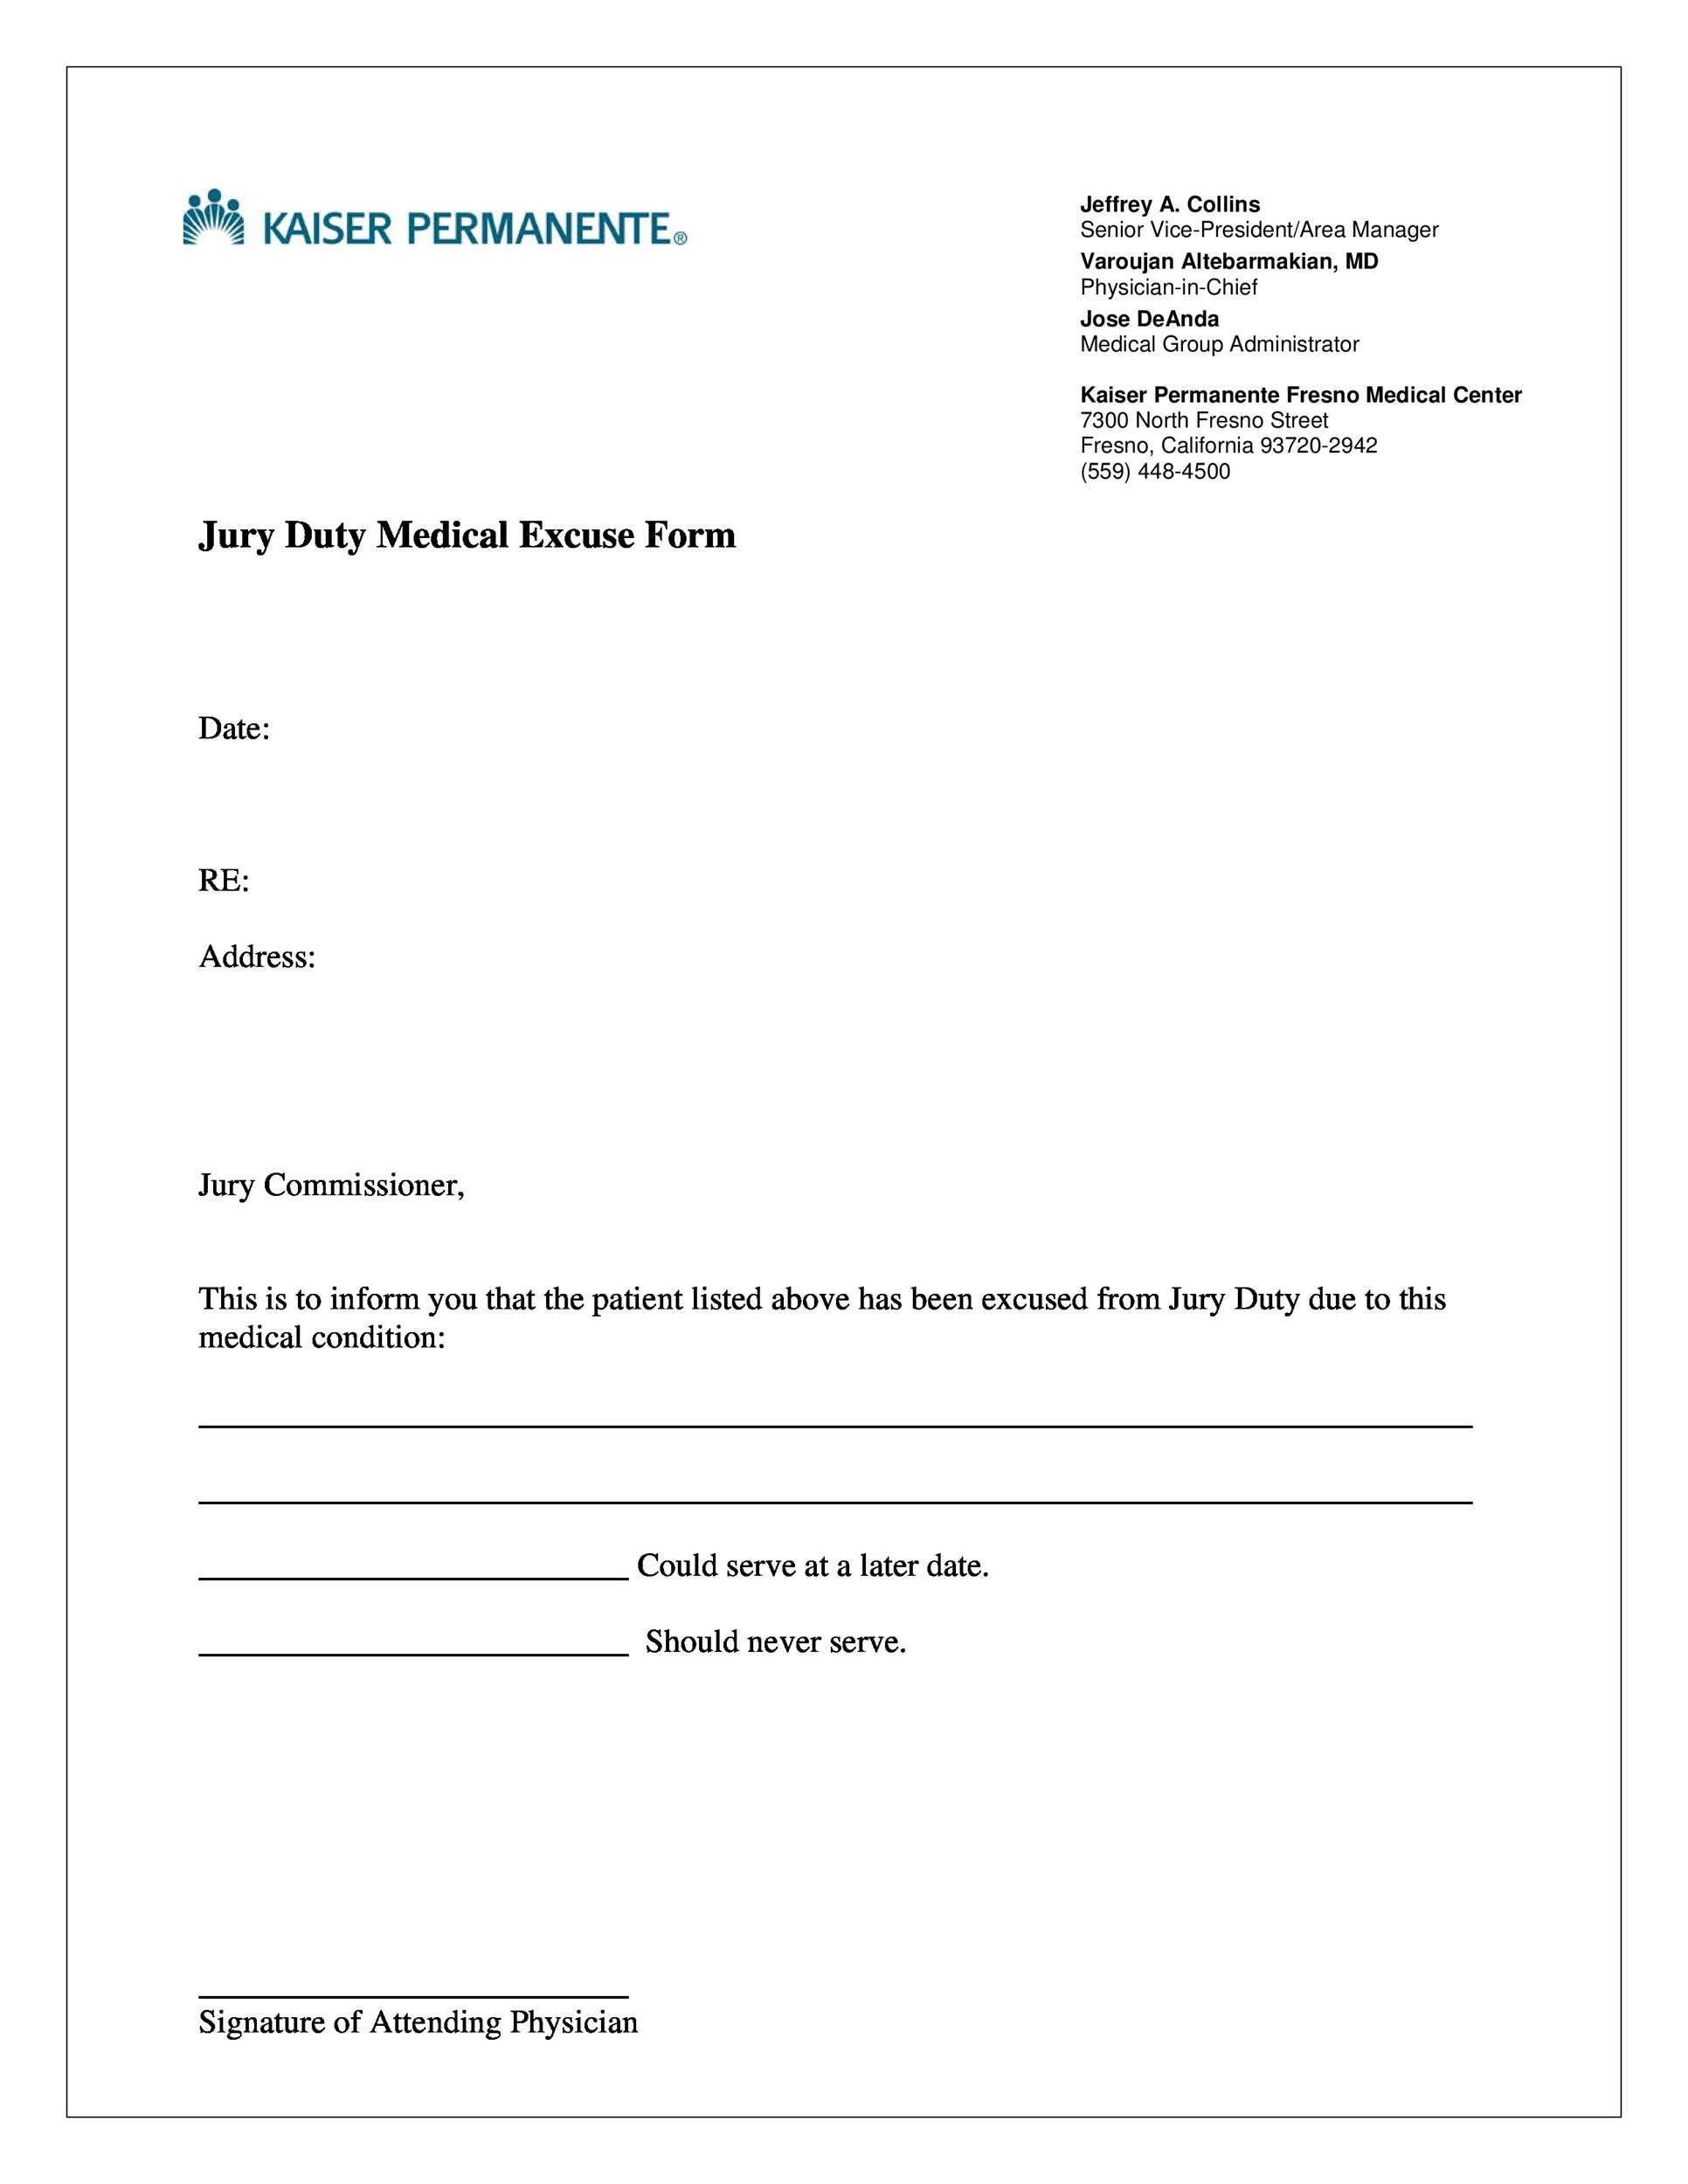 jury-duty-letter-form-fill-out-and-sign-printable-pdf-template-signnow